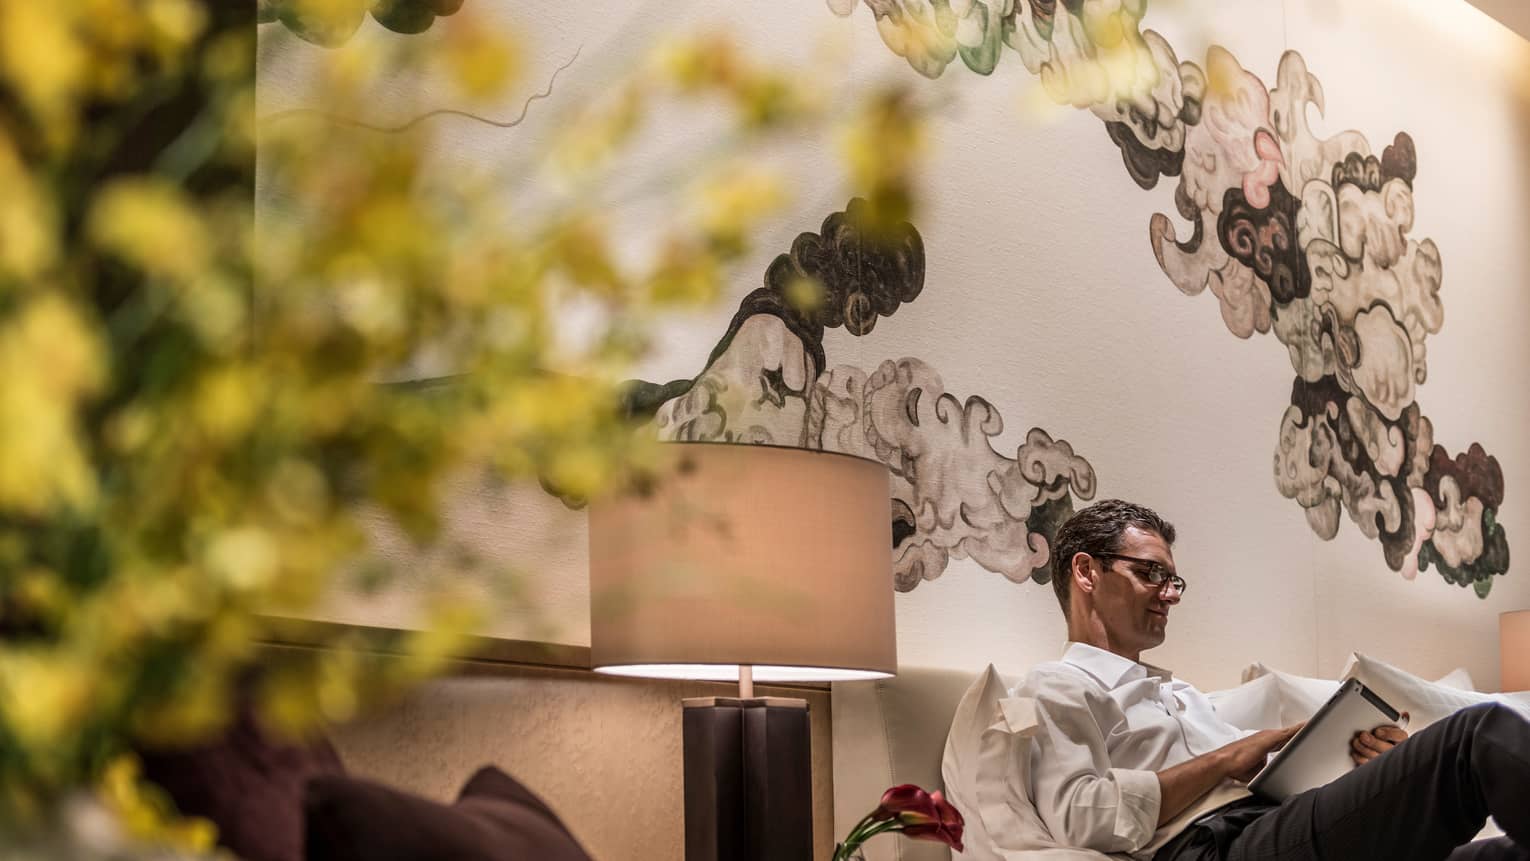 Man lounges, reads iPad on sofa next to lamp under black-and-white Chinese brushwork mural